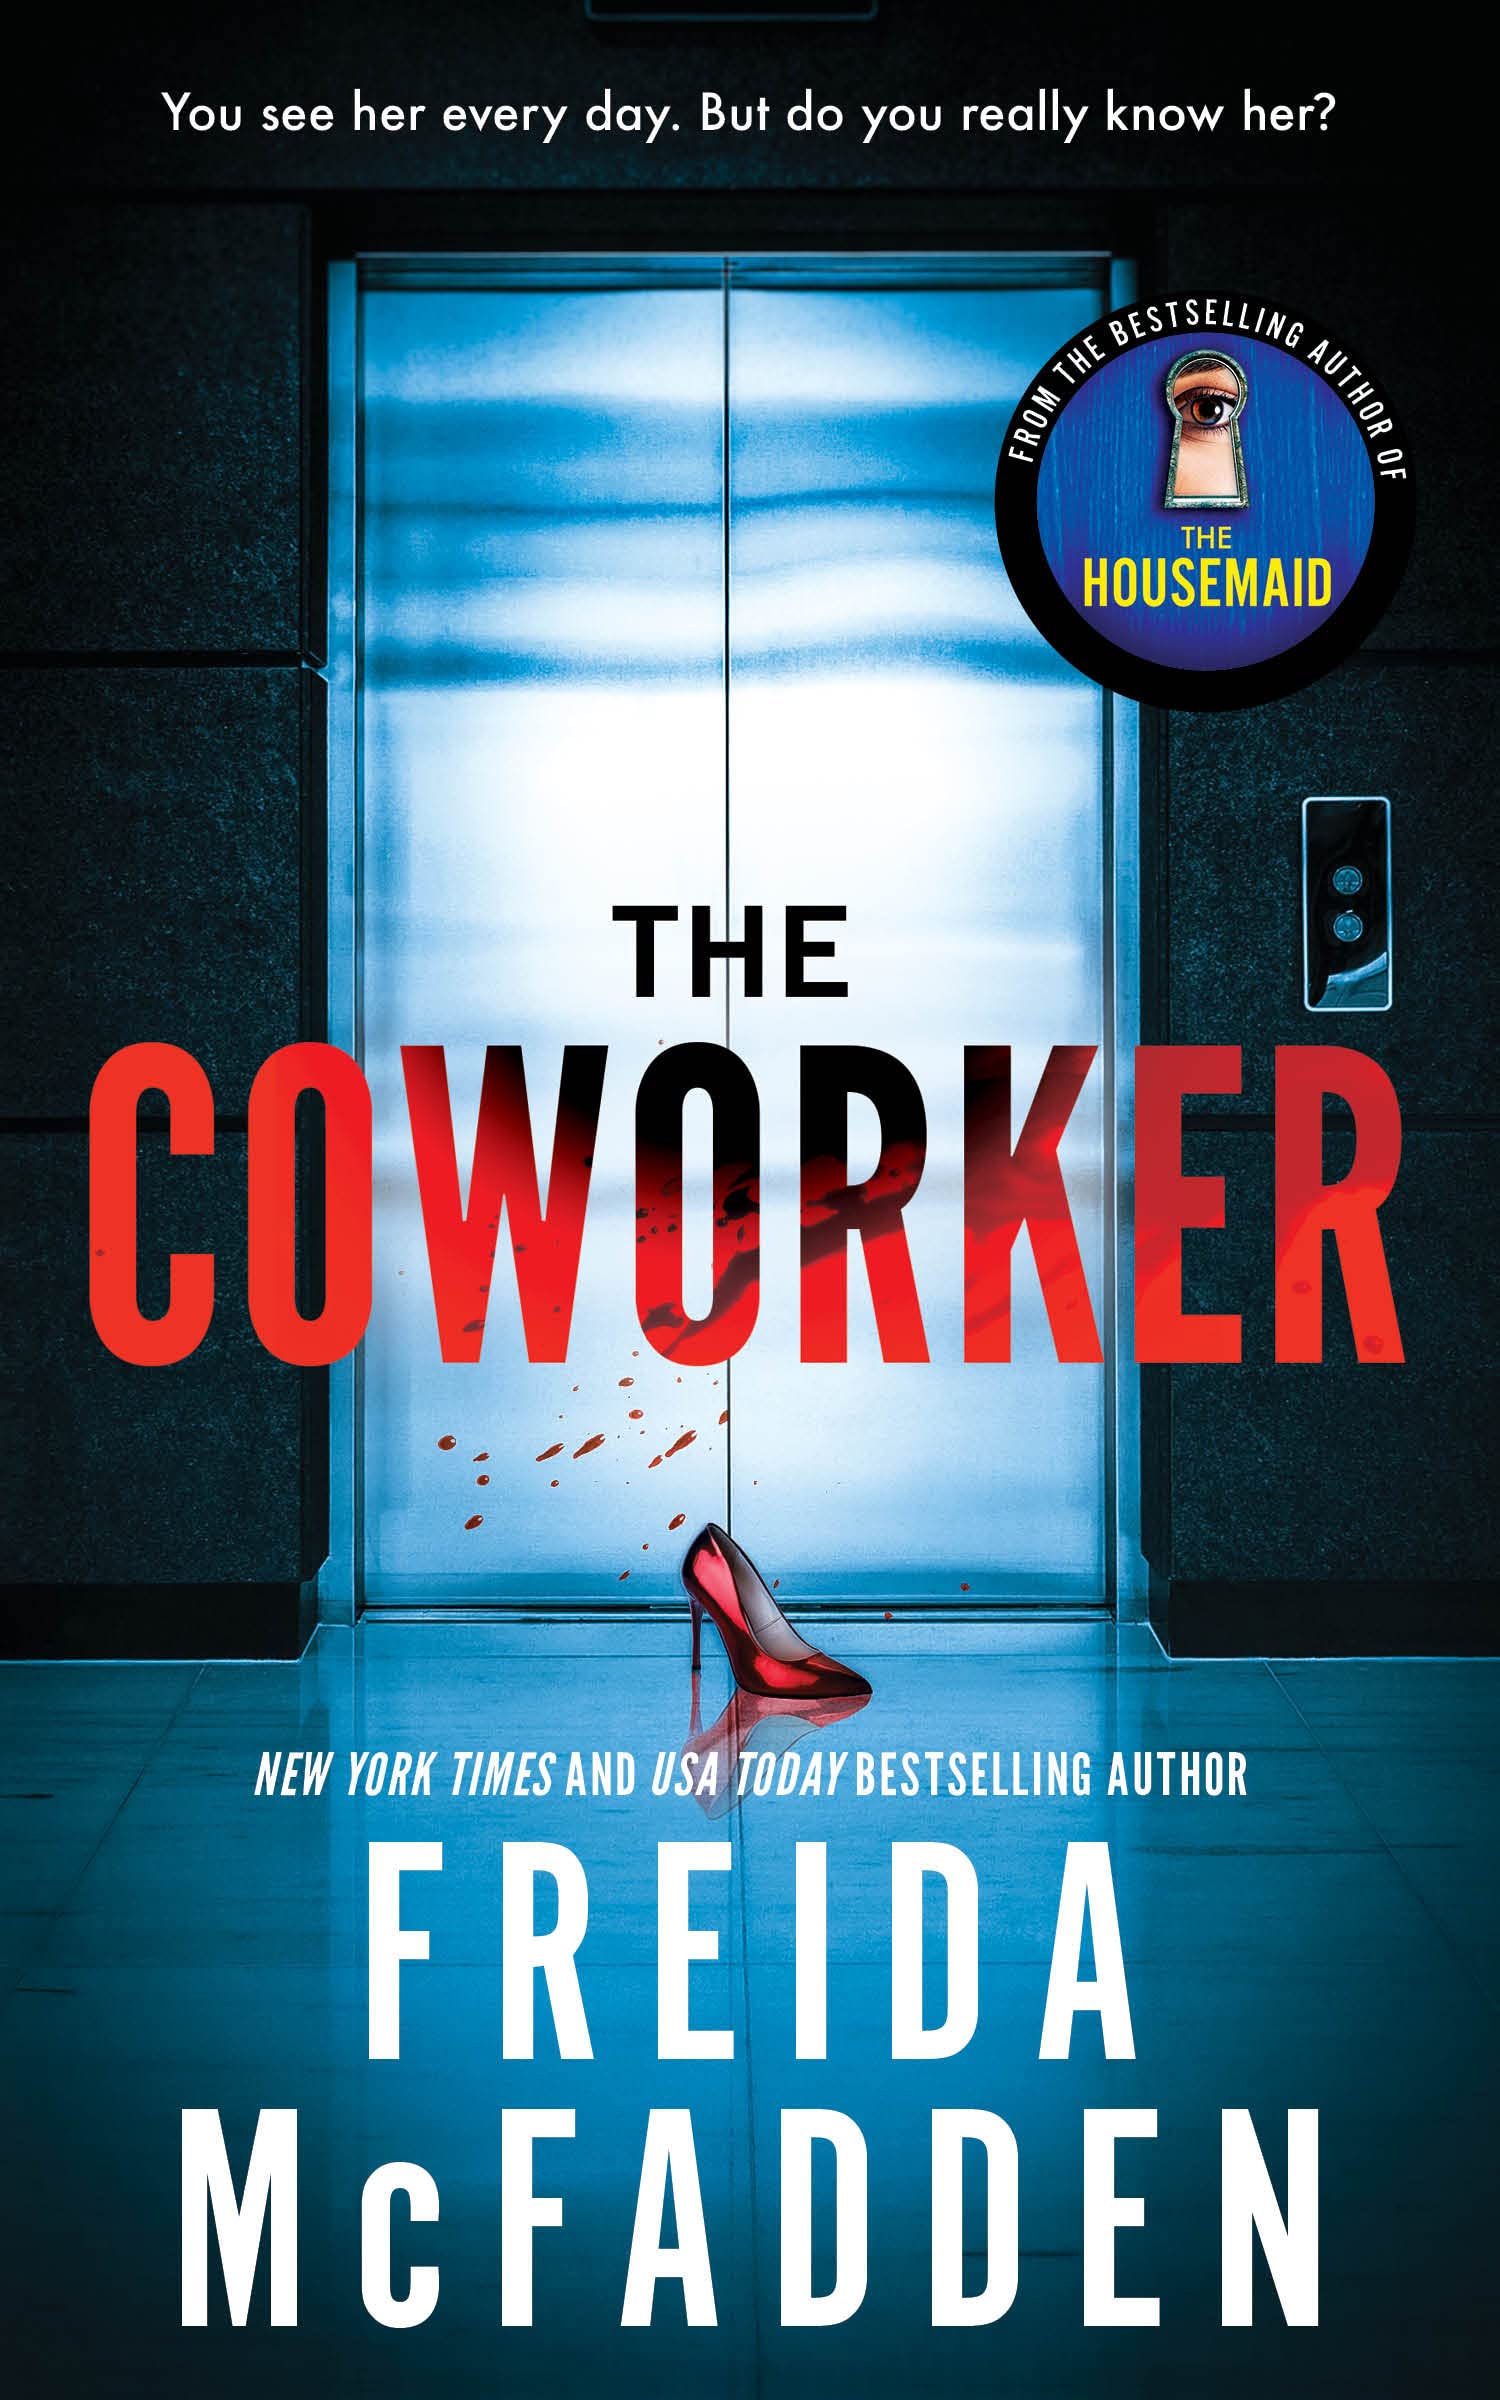 Image for "The Coworker"